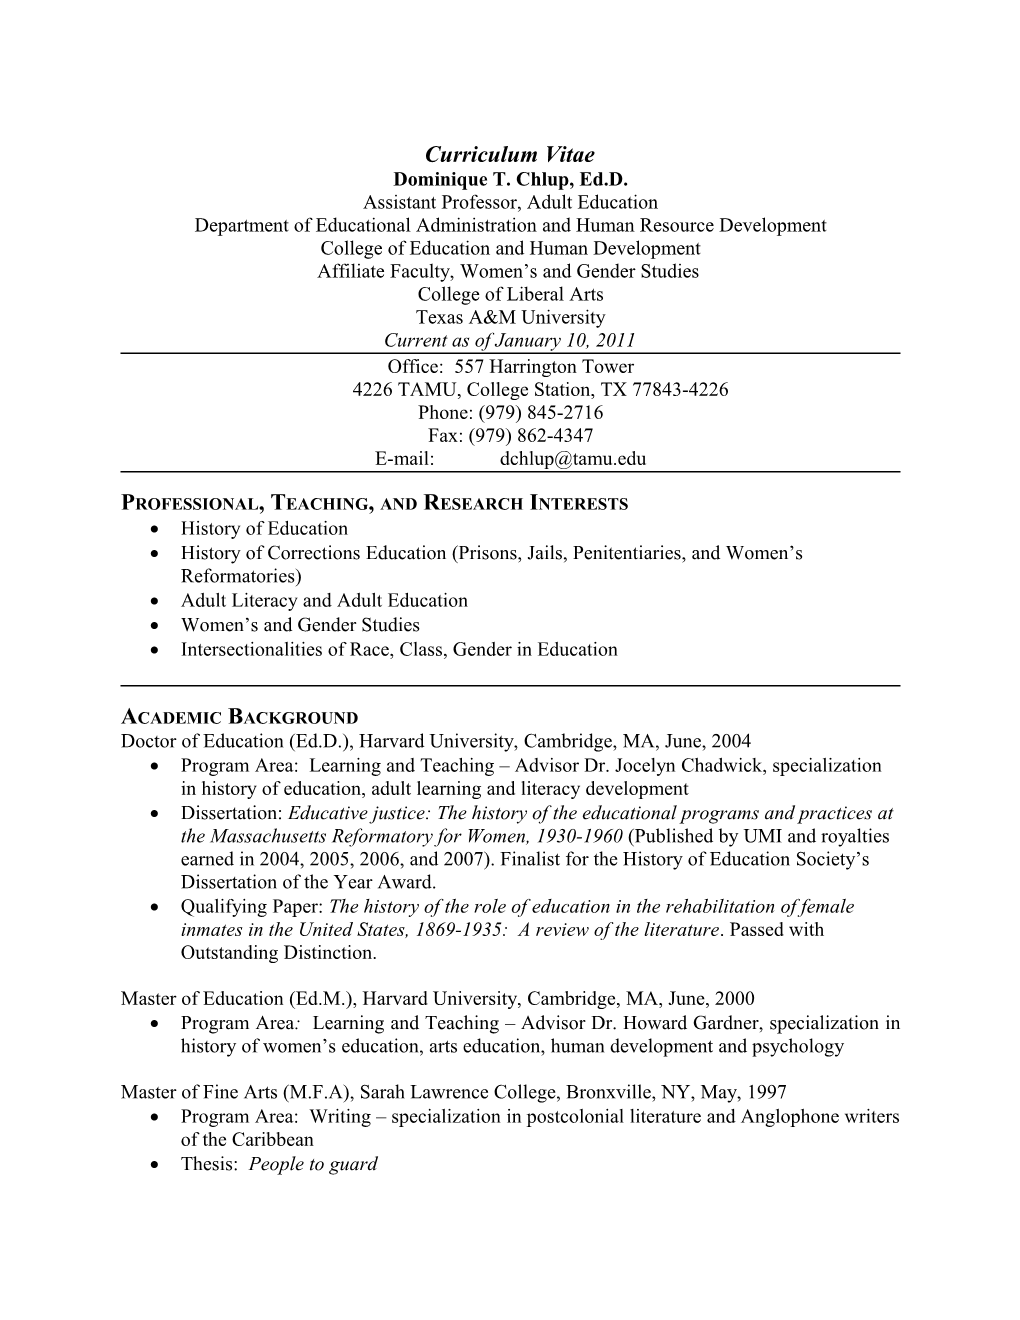 Dominique T. Chlup, Curriculum Vitae, Page 1 out of 43